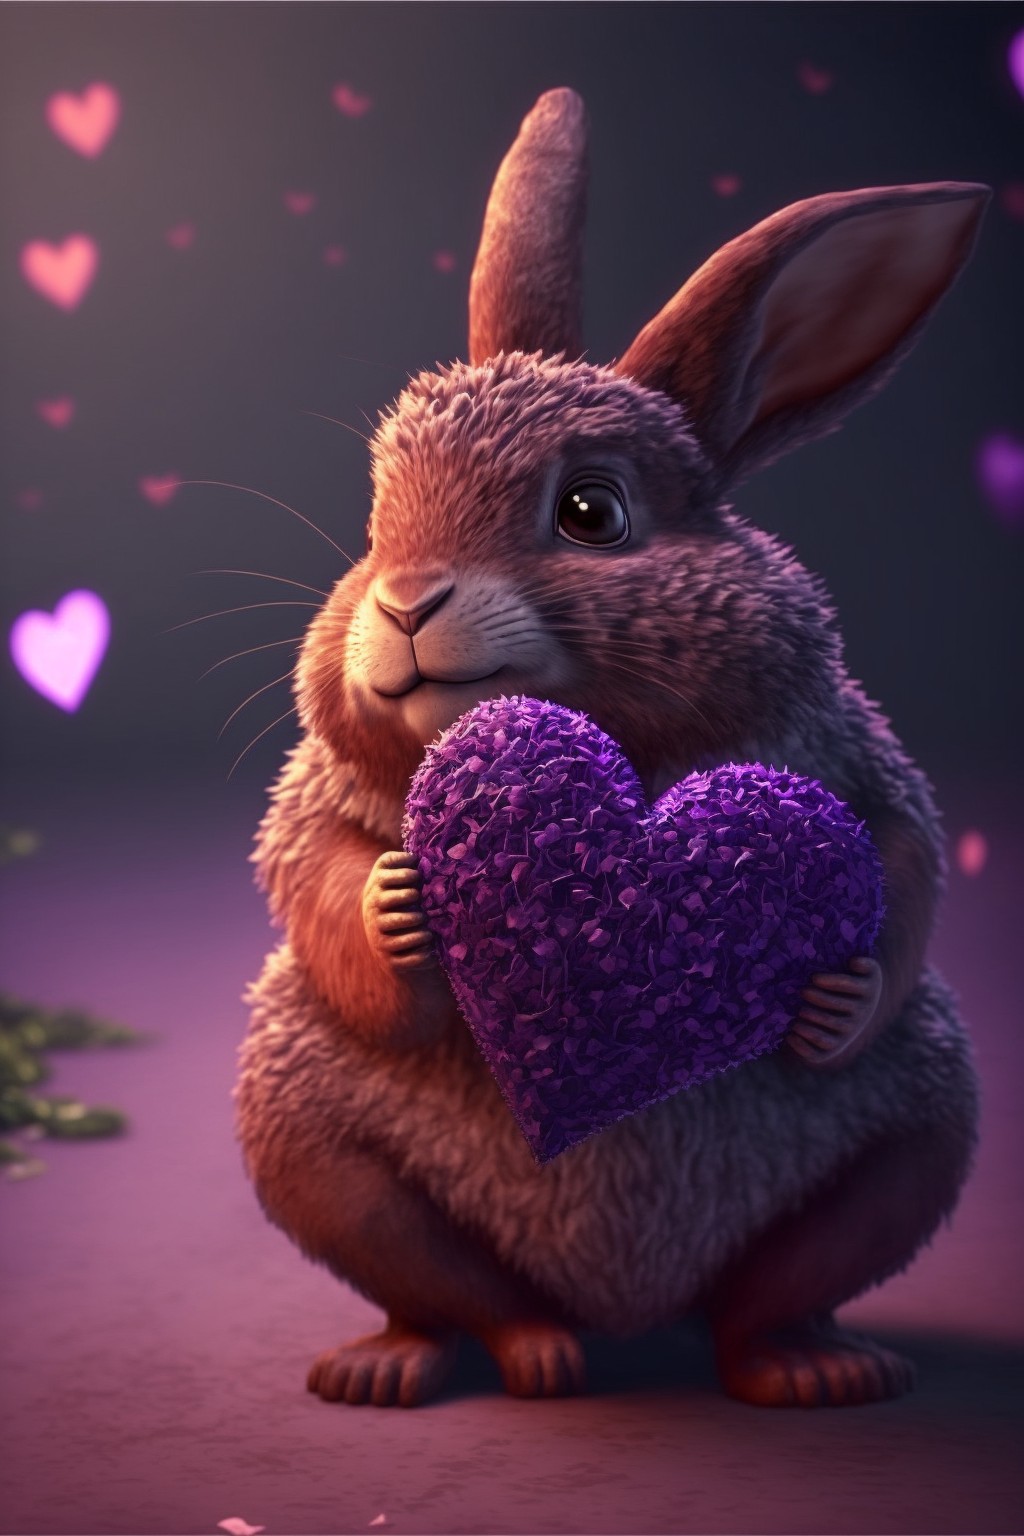 8 images of cute bunny holding a purple heart by Midjourney